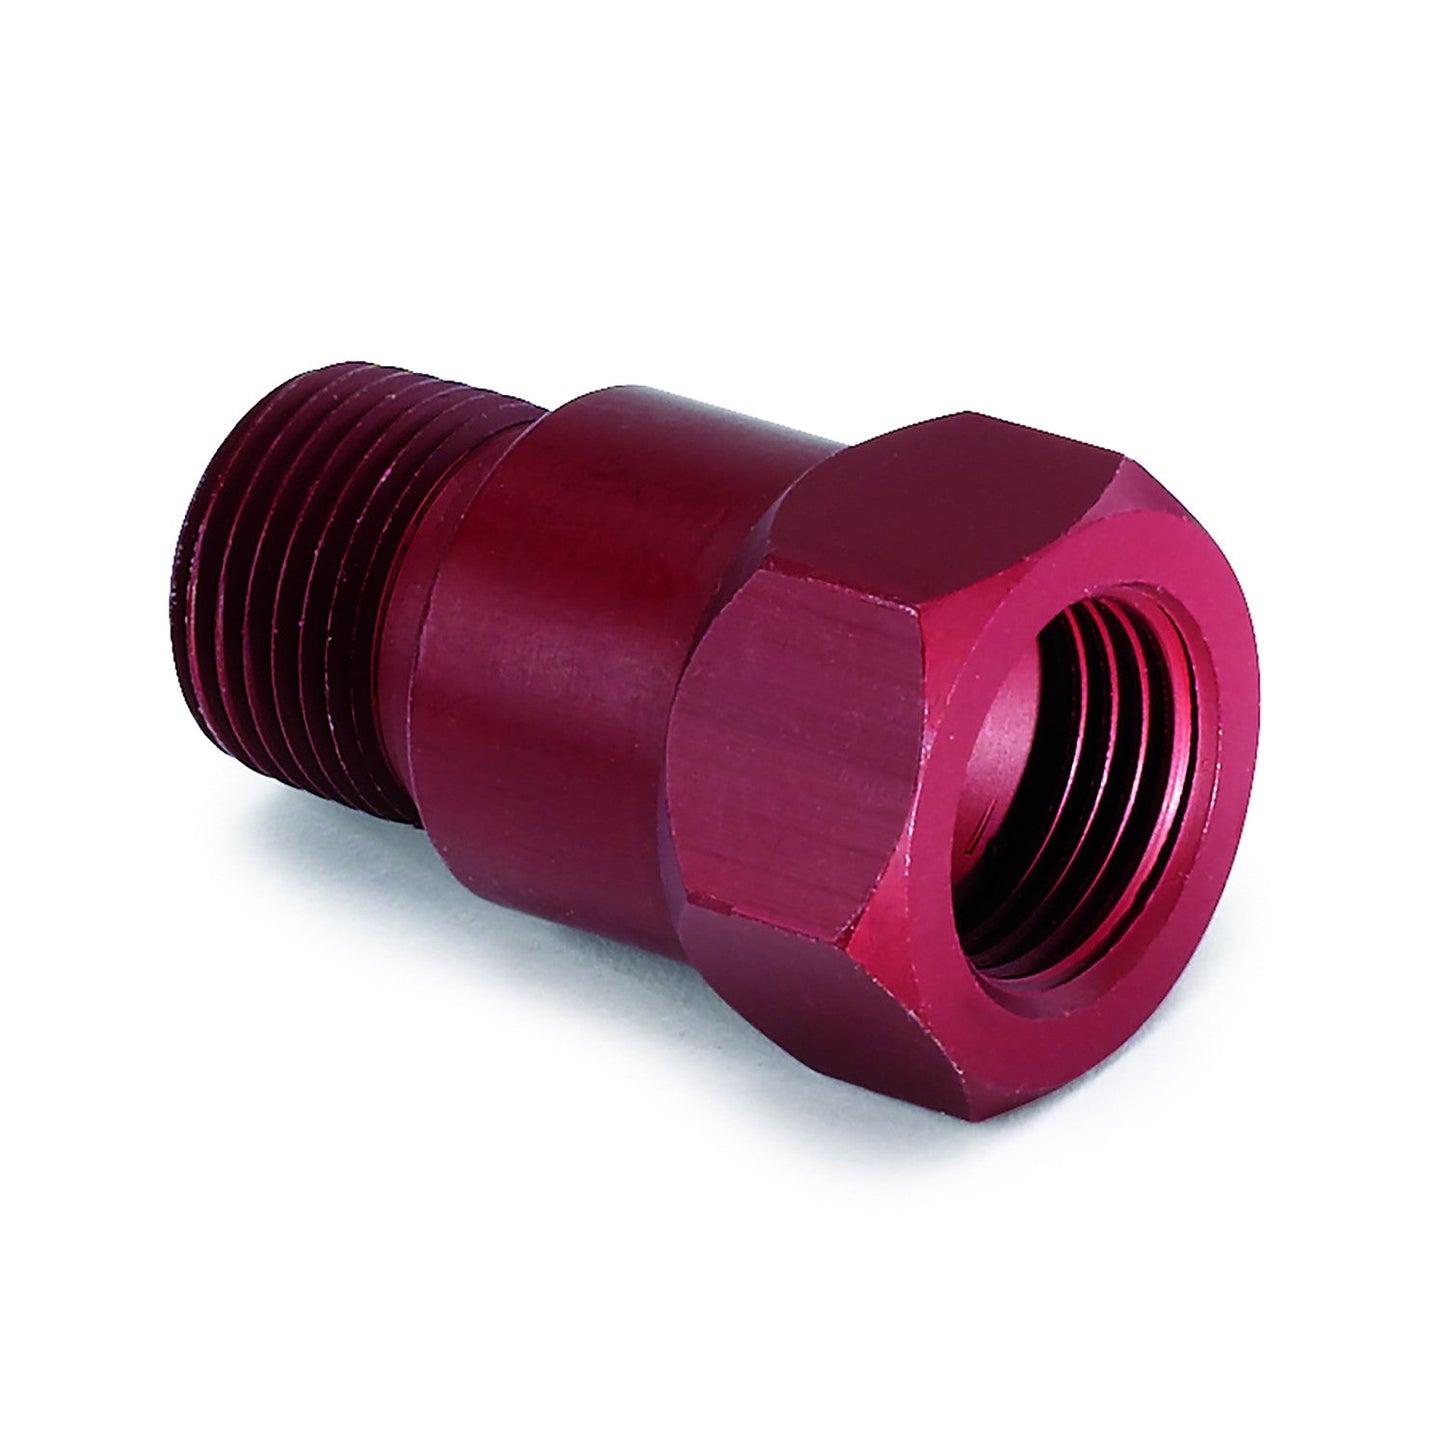 AutoMeter - FITTING, ADAPTER, 3/8" NPT MALE, ALUMINUM, RED, FOR MECH. TEMP. GAUGE (2272)